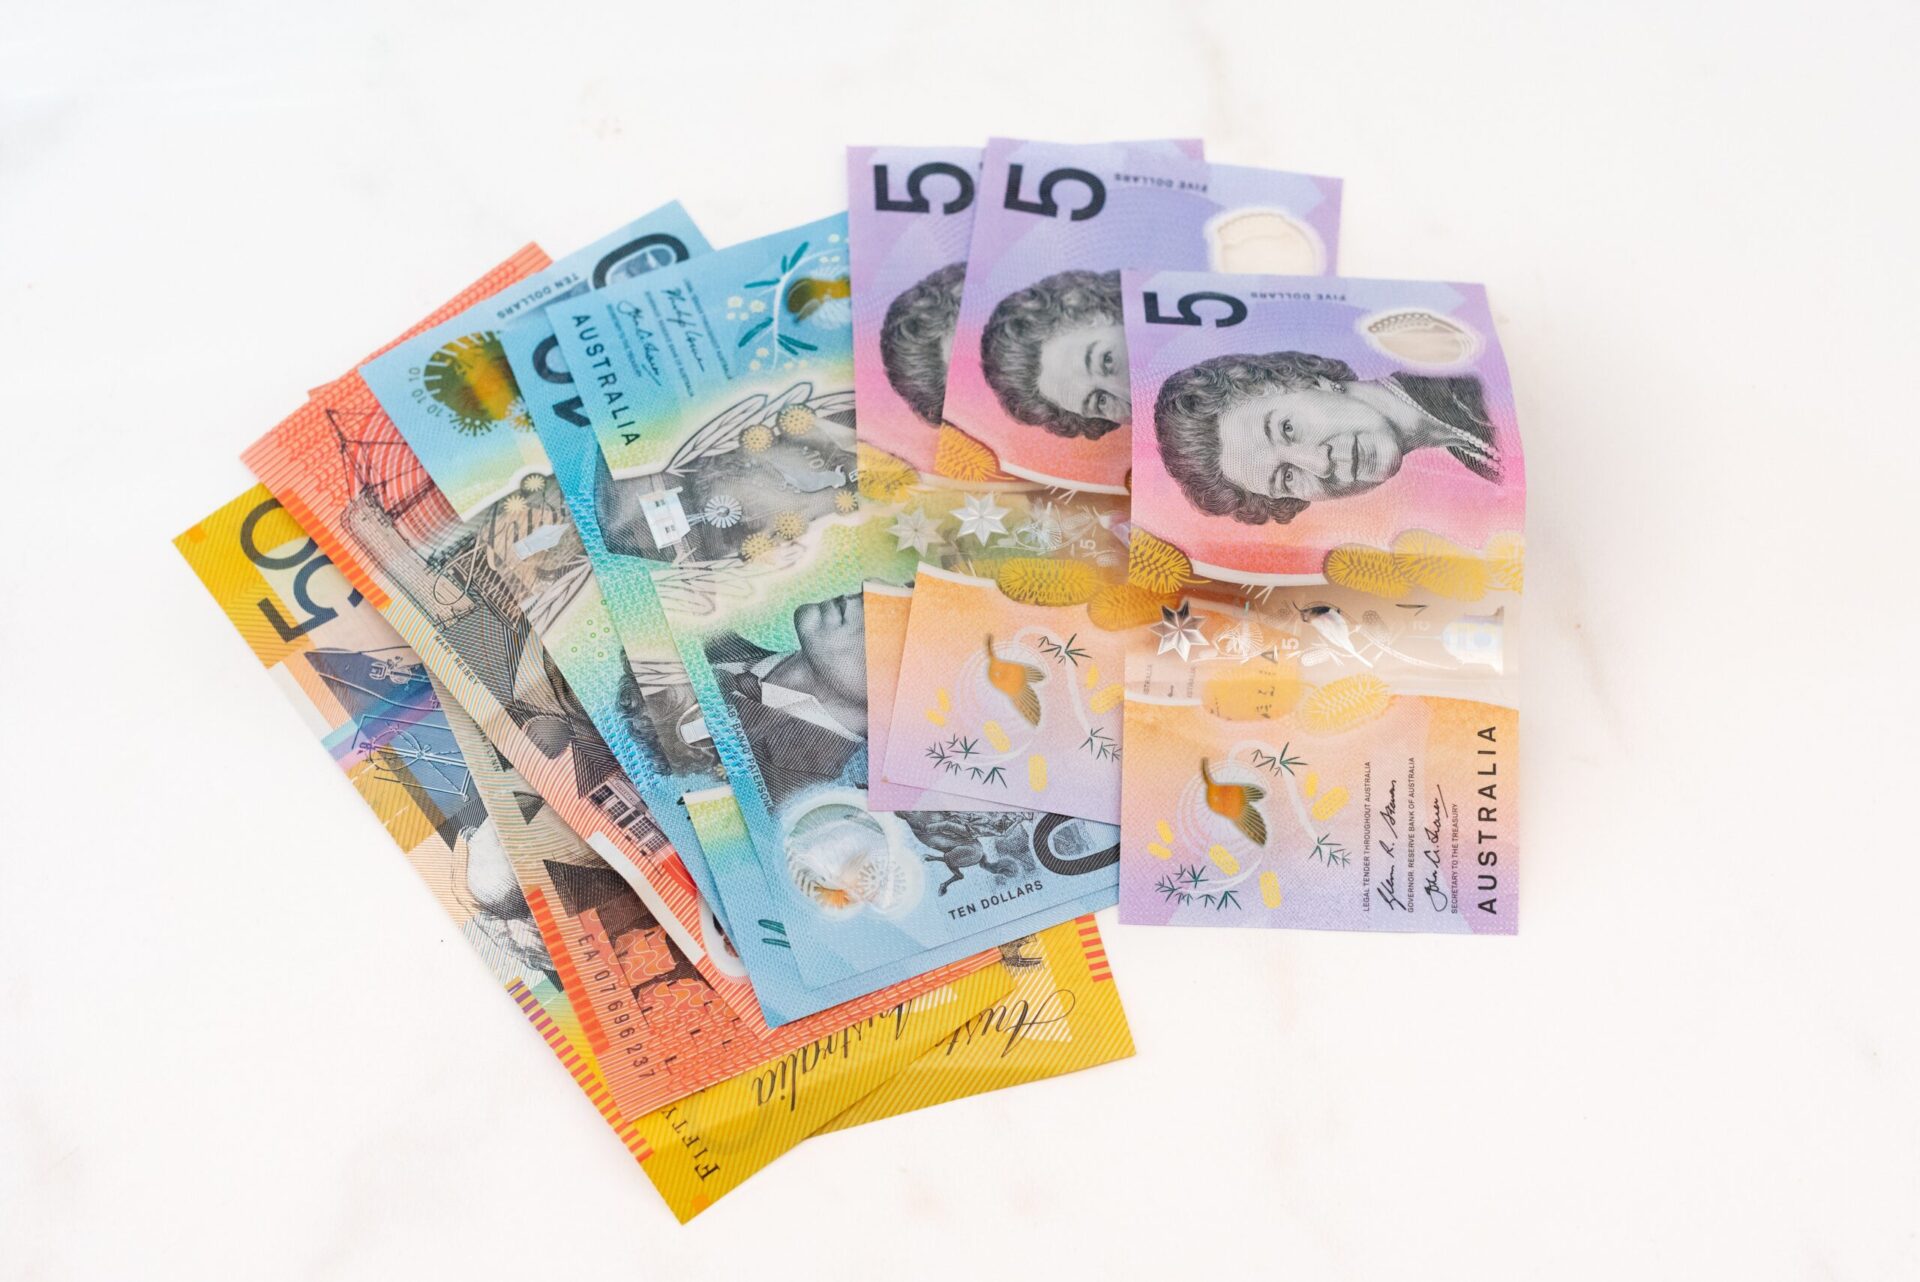 Australian money background showing $5, $10 and $50 notes